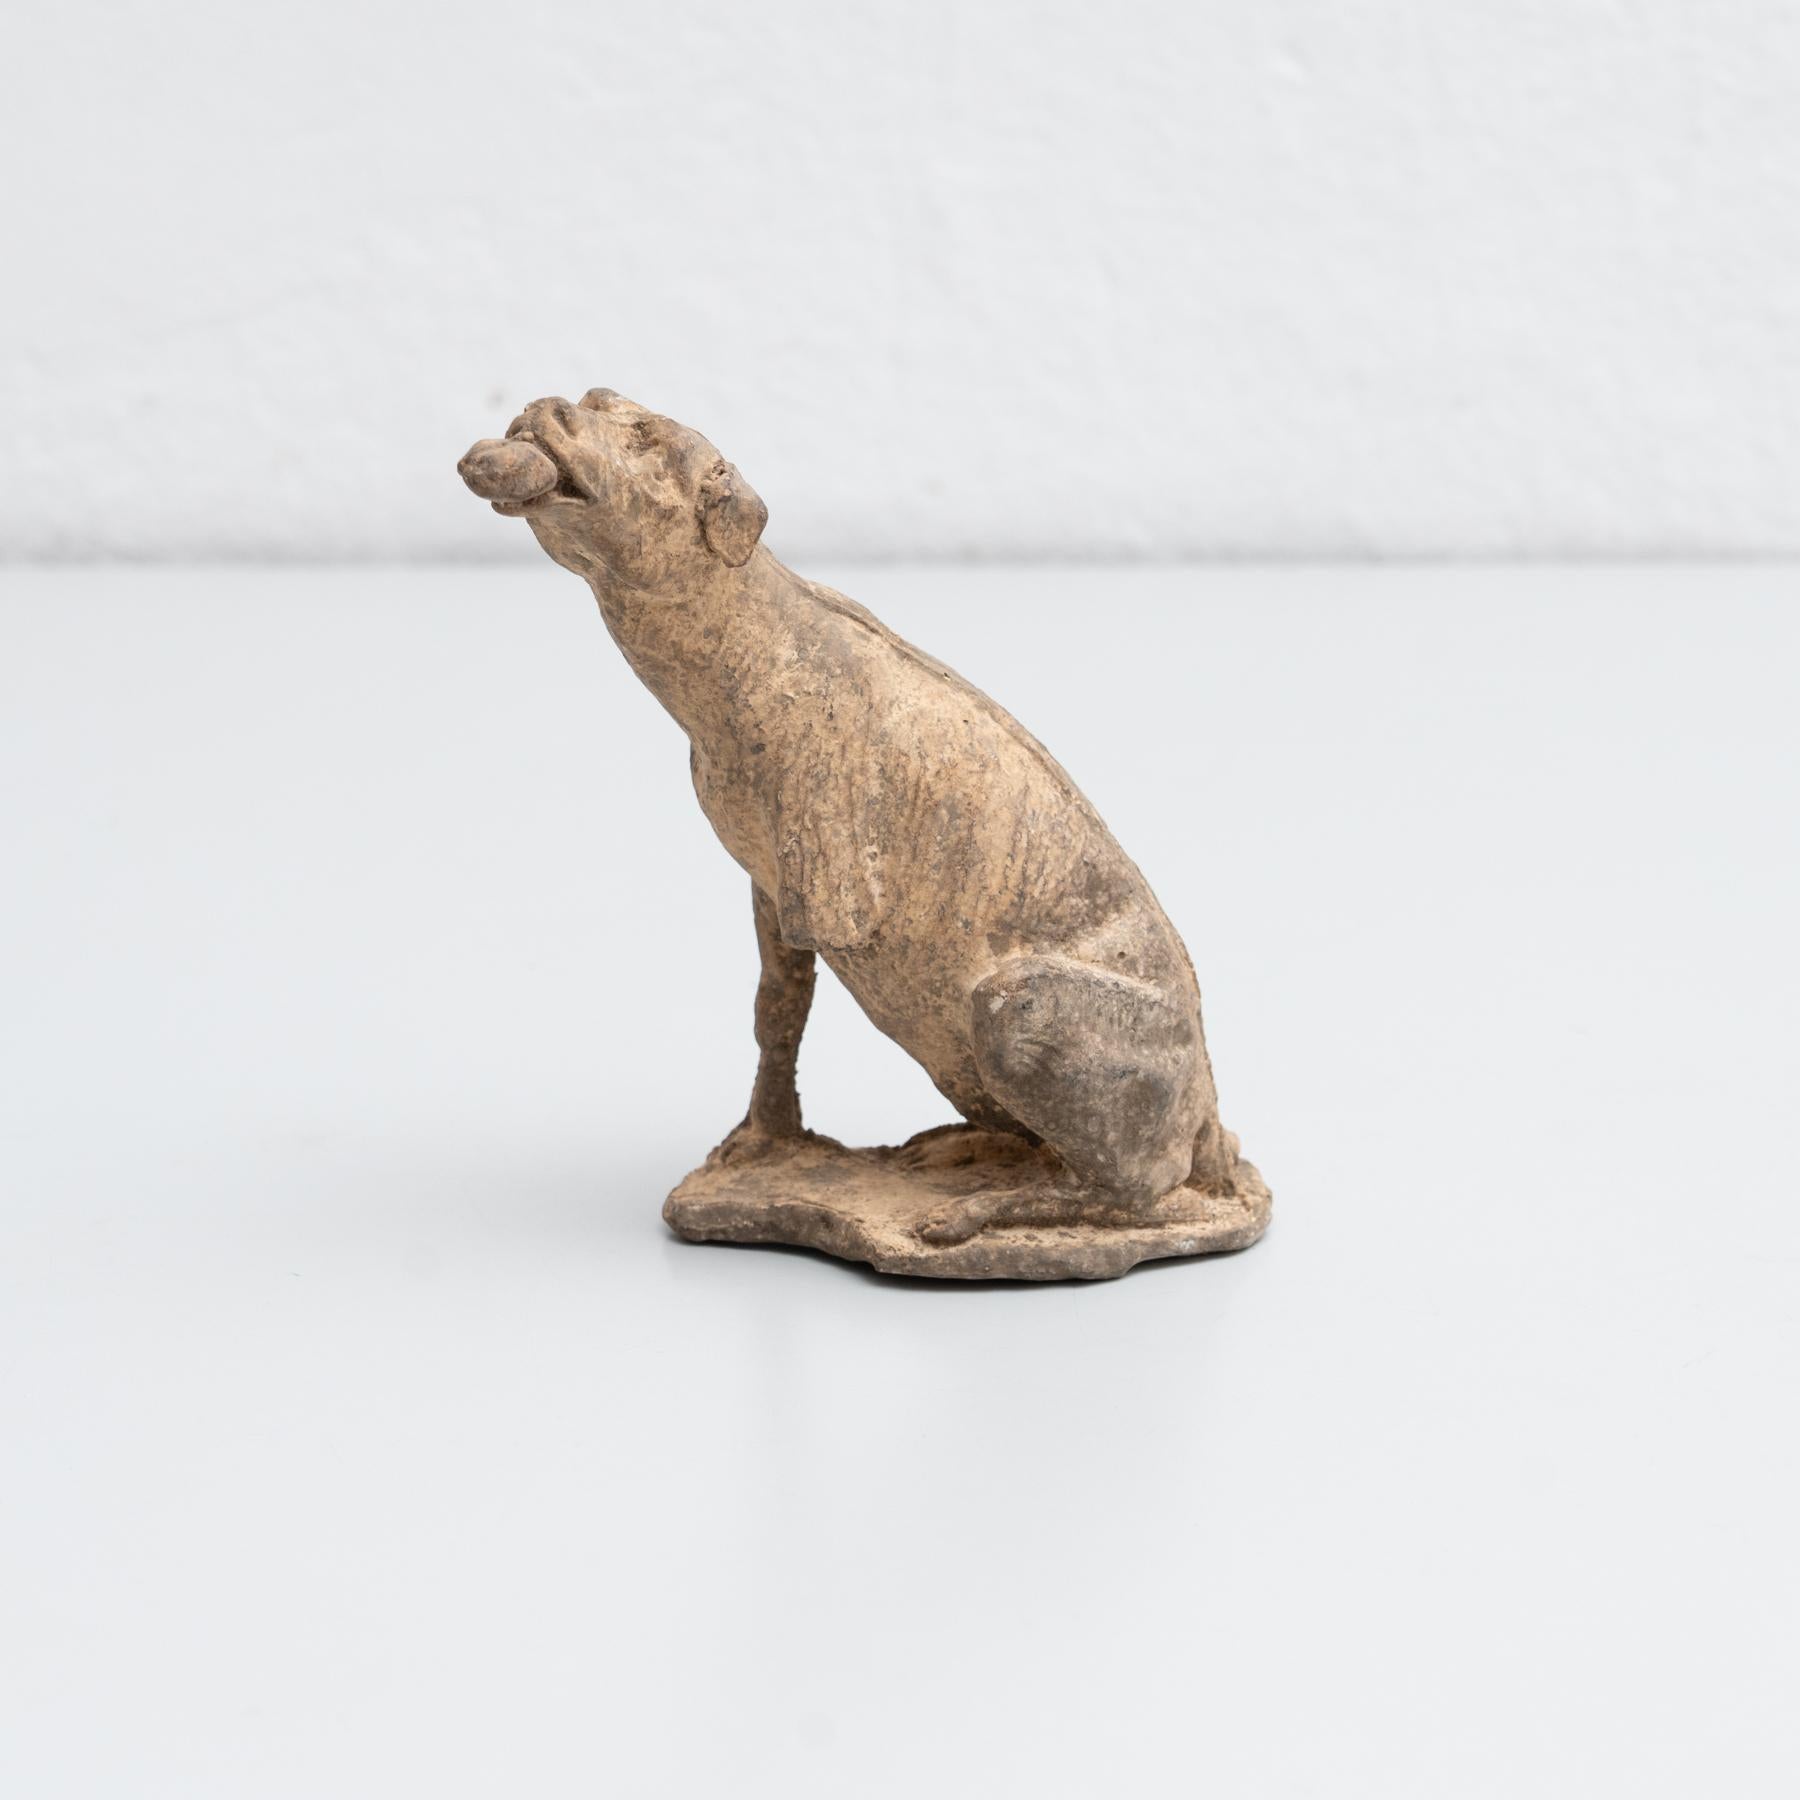 Traditional plaster figure of a dog.

Made in traditional Catalan atelier in Olot, Spain, circa 1950.

In original condition, with minor wear consistent with age and use, preserving a beautiful patina.

Olot has a long tradition in the